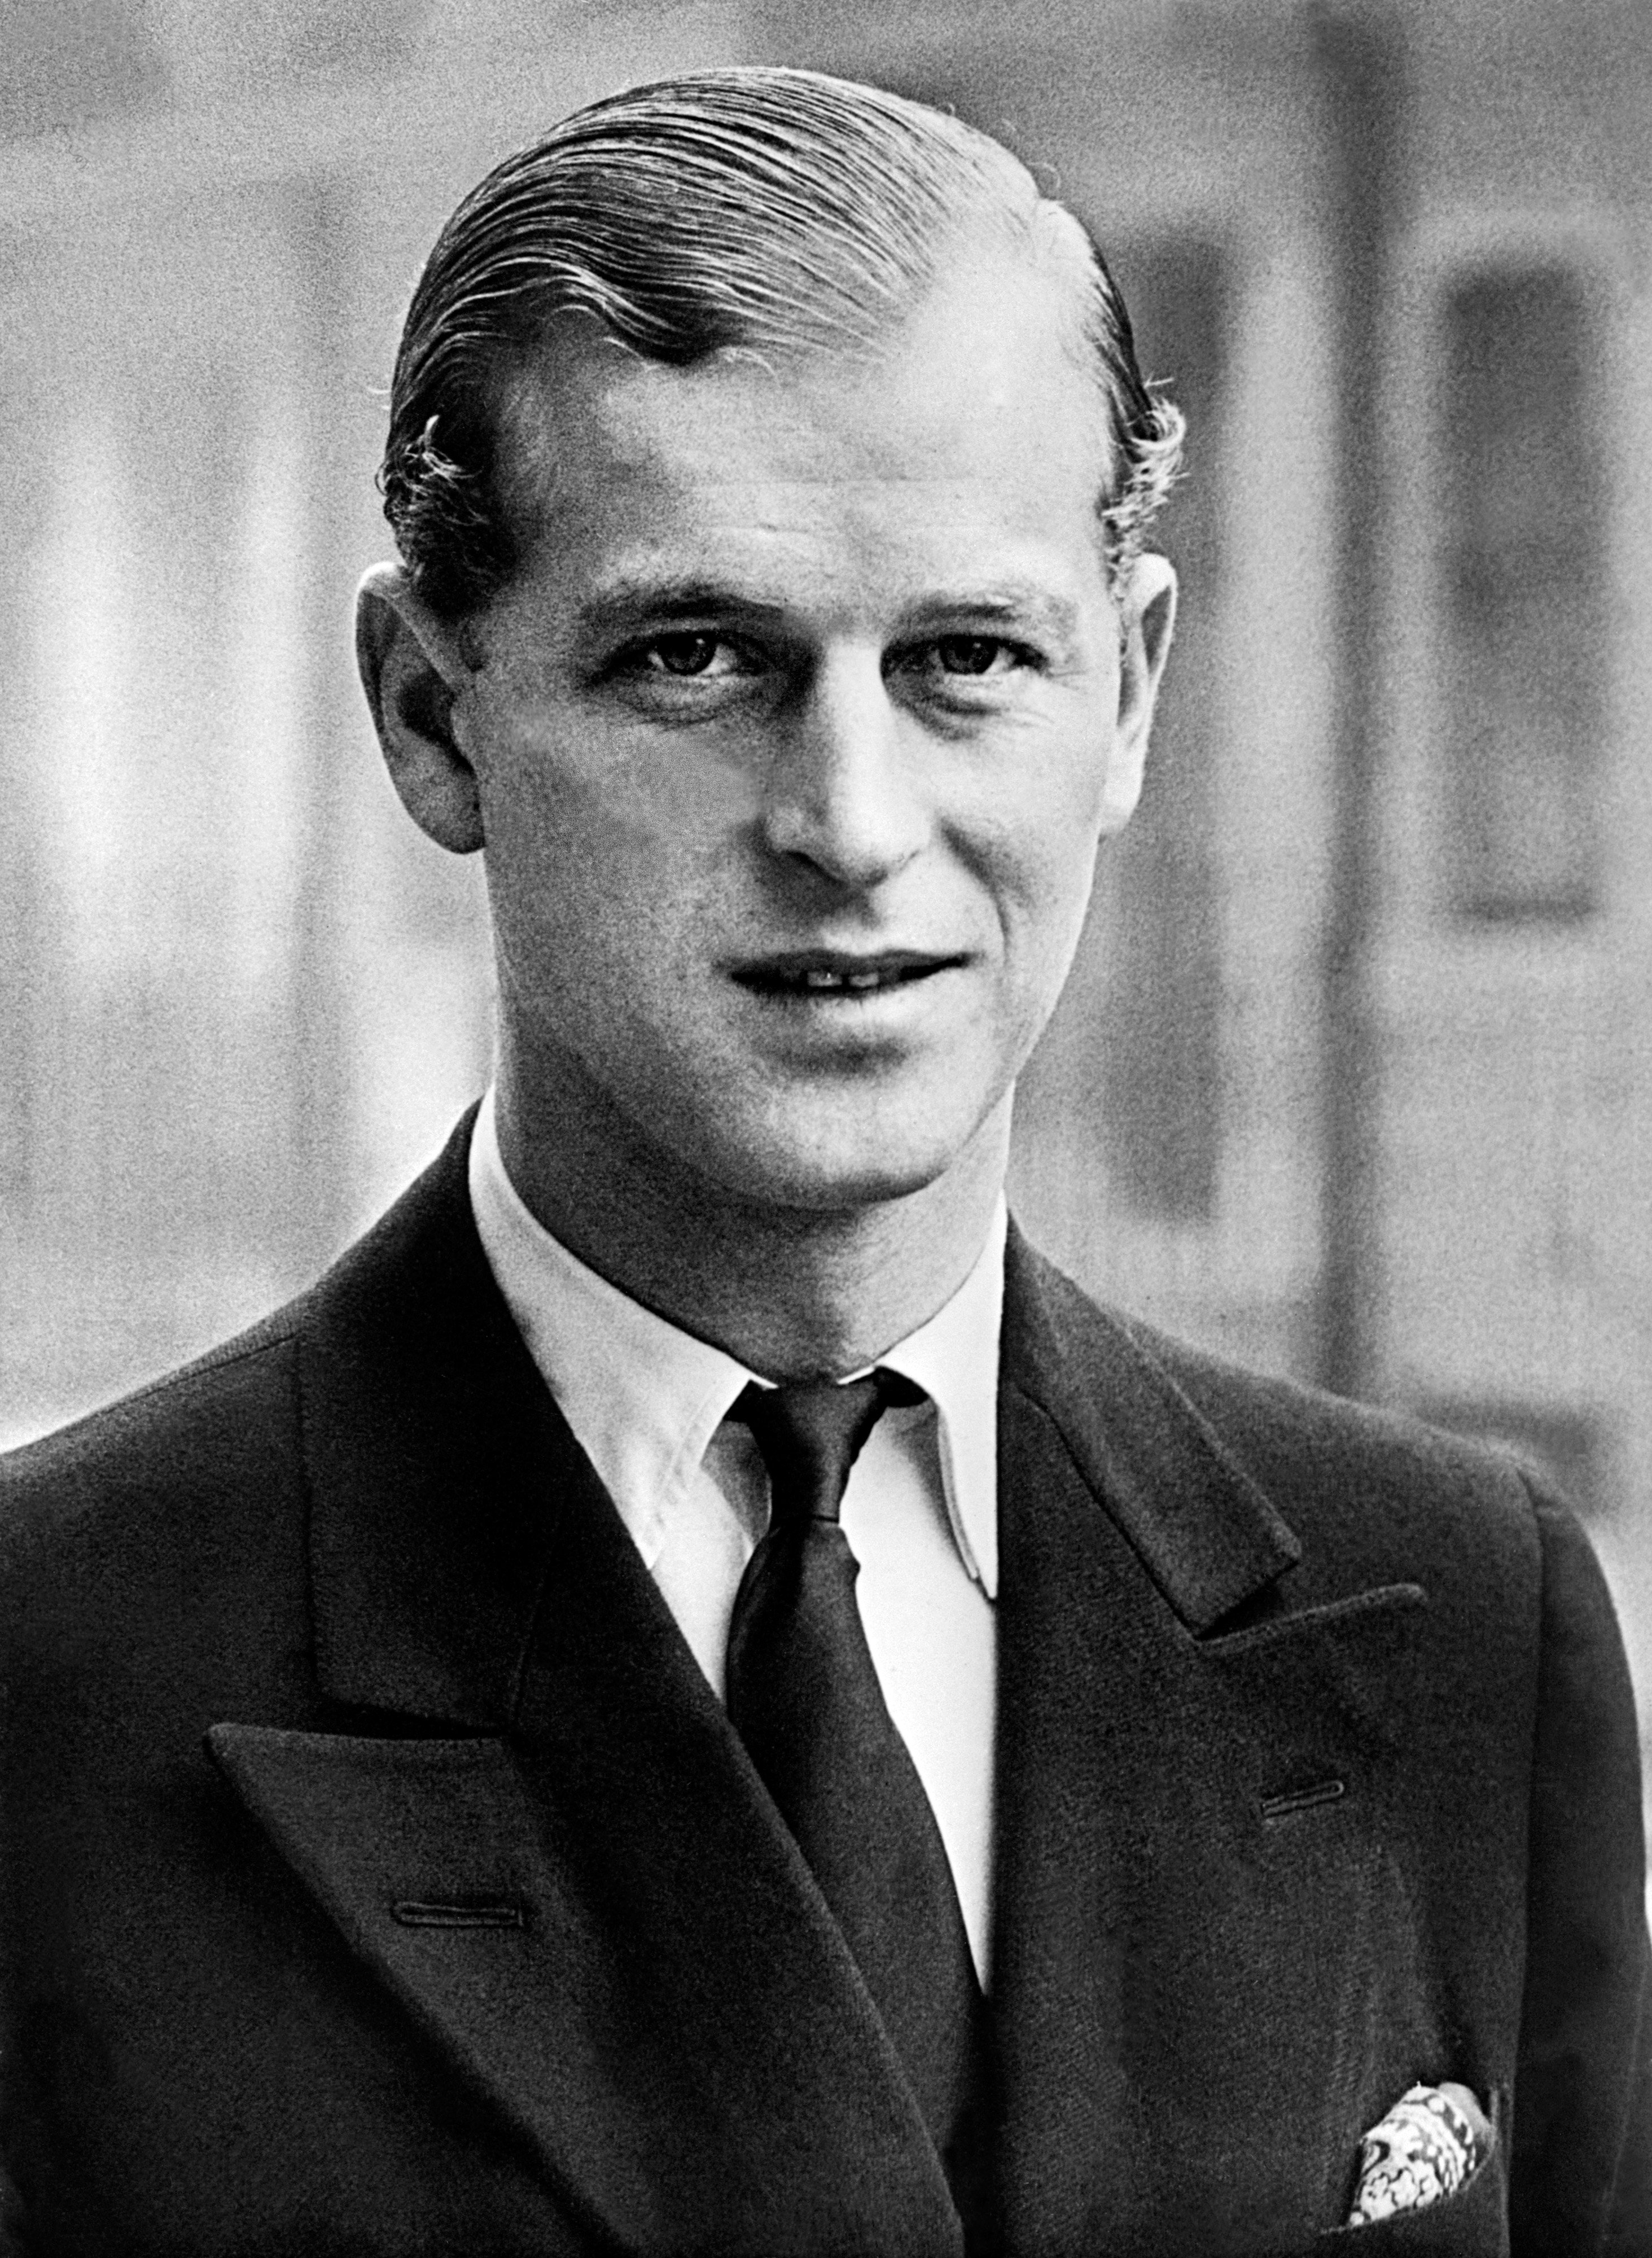 A picture of Prince Philip of Greece, later Philip Mountbatten, Duke of Edinburgh | Photo: Getty Images